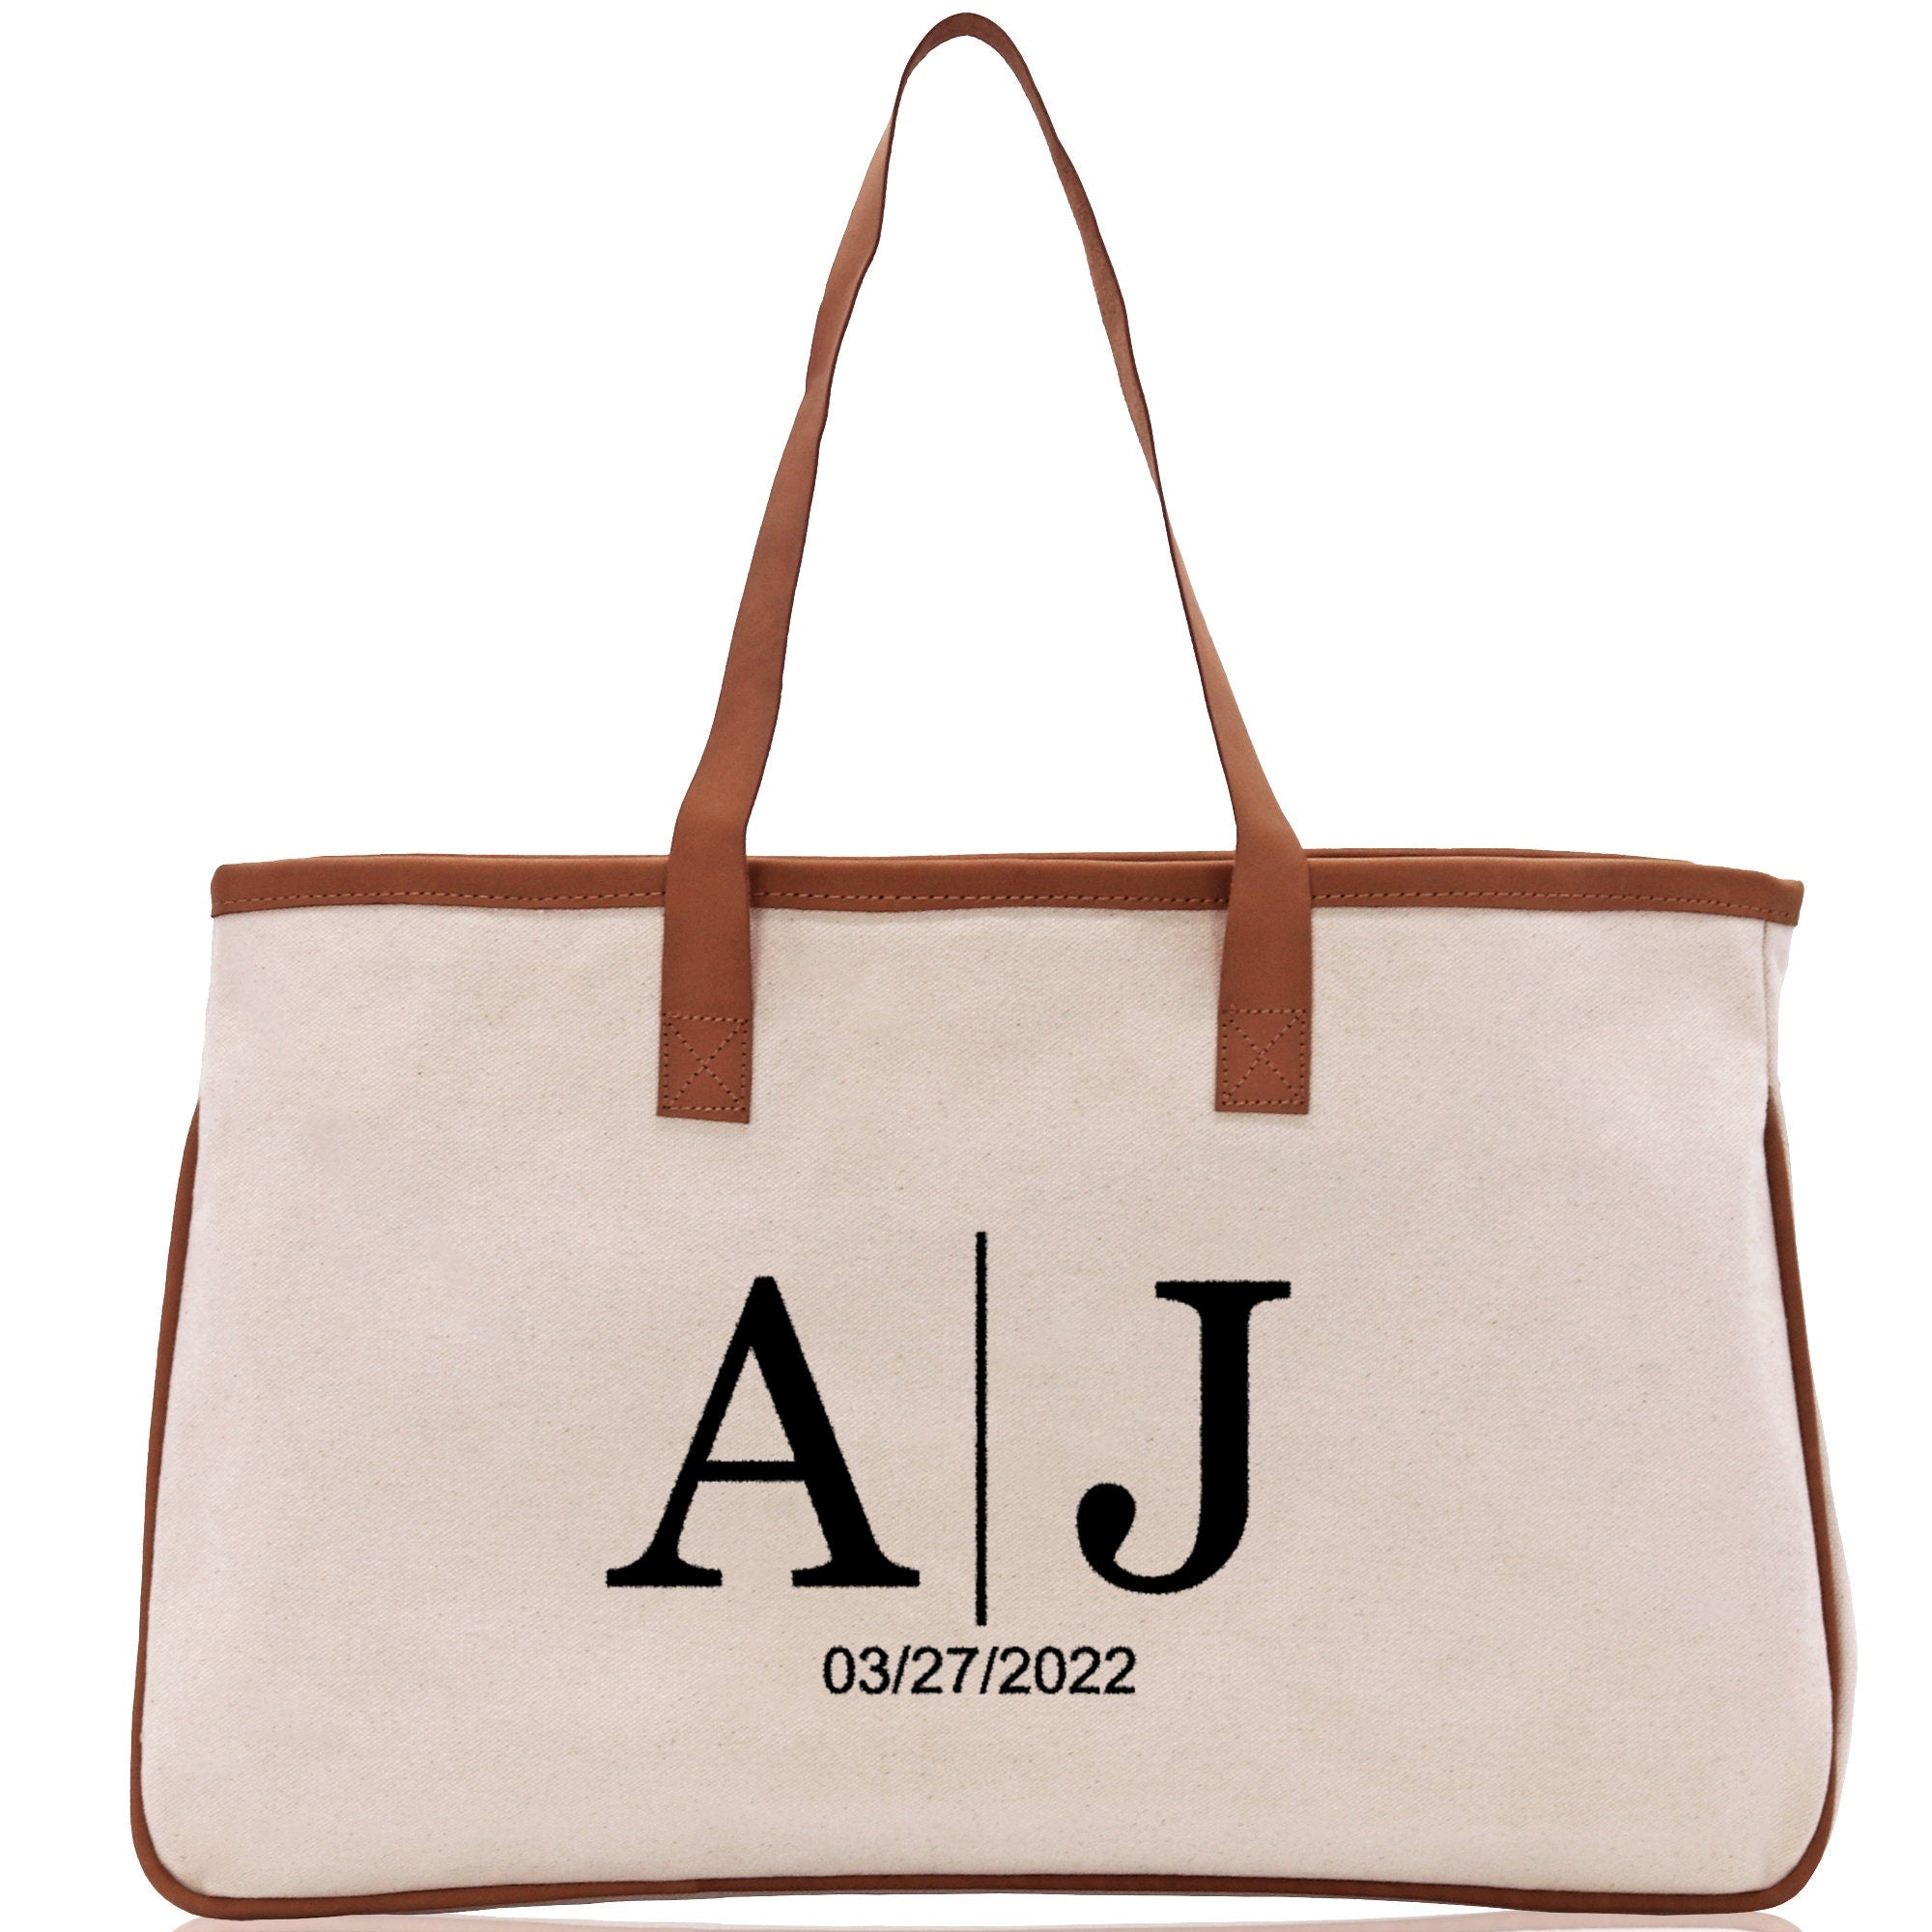 Initials and Date Customized Embroidered Tote Bag 100% Cotton Canvas and Chic Personalized Tote Bag for Bridesmaid Anniversary Wedding Day